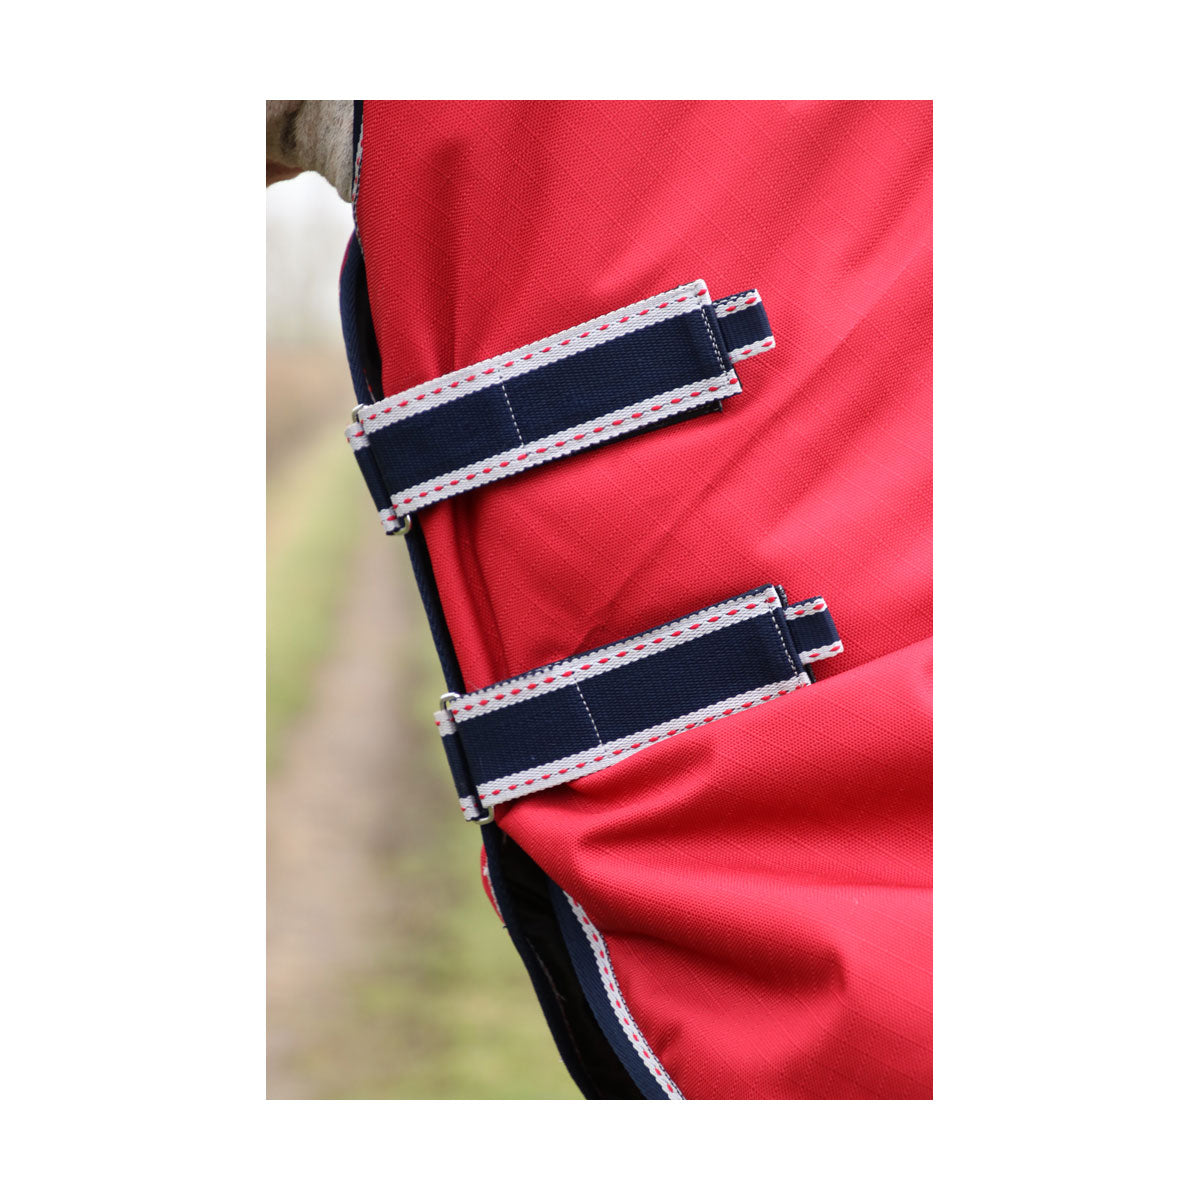 DefenceX System 200 Turnout Rug with Detachable Neck Cover Turnout Rugs Barnstaple Equestrian Supplies